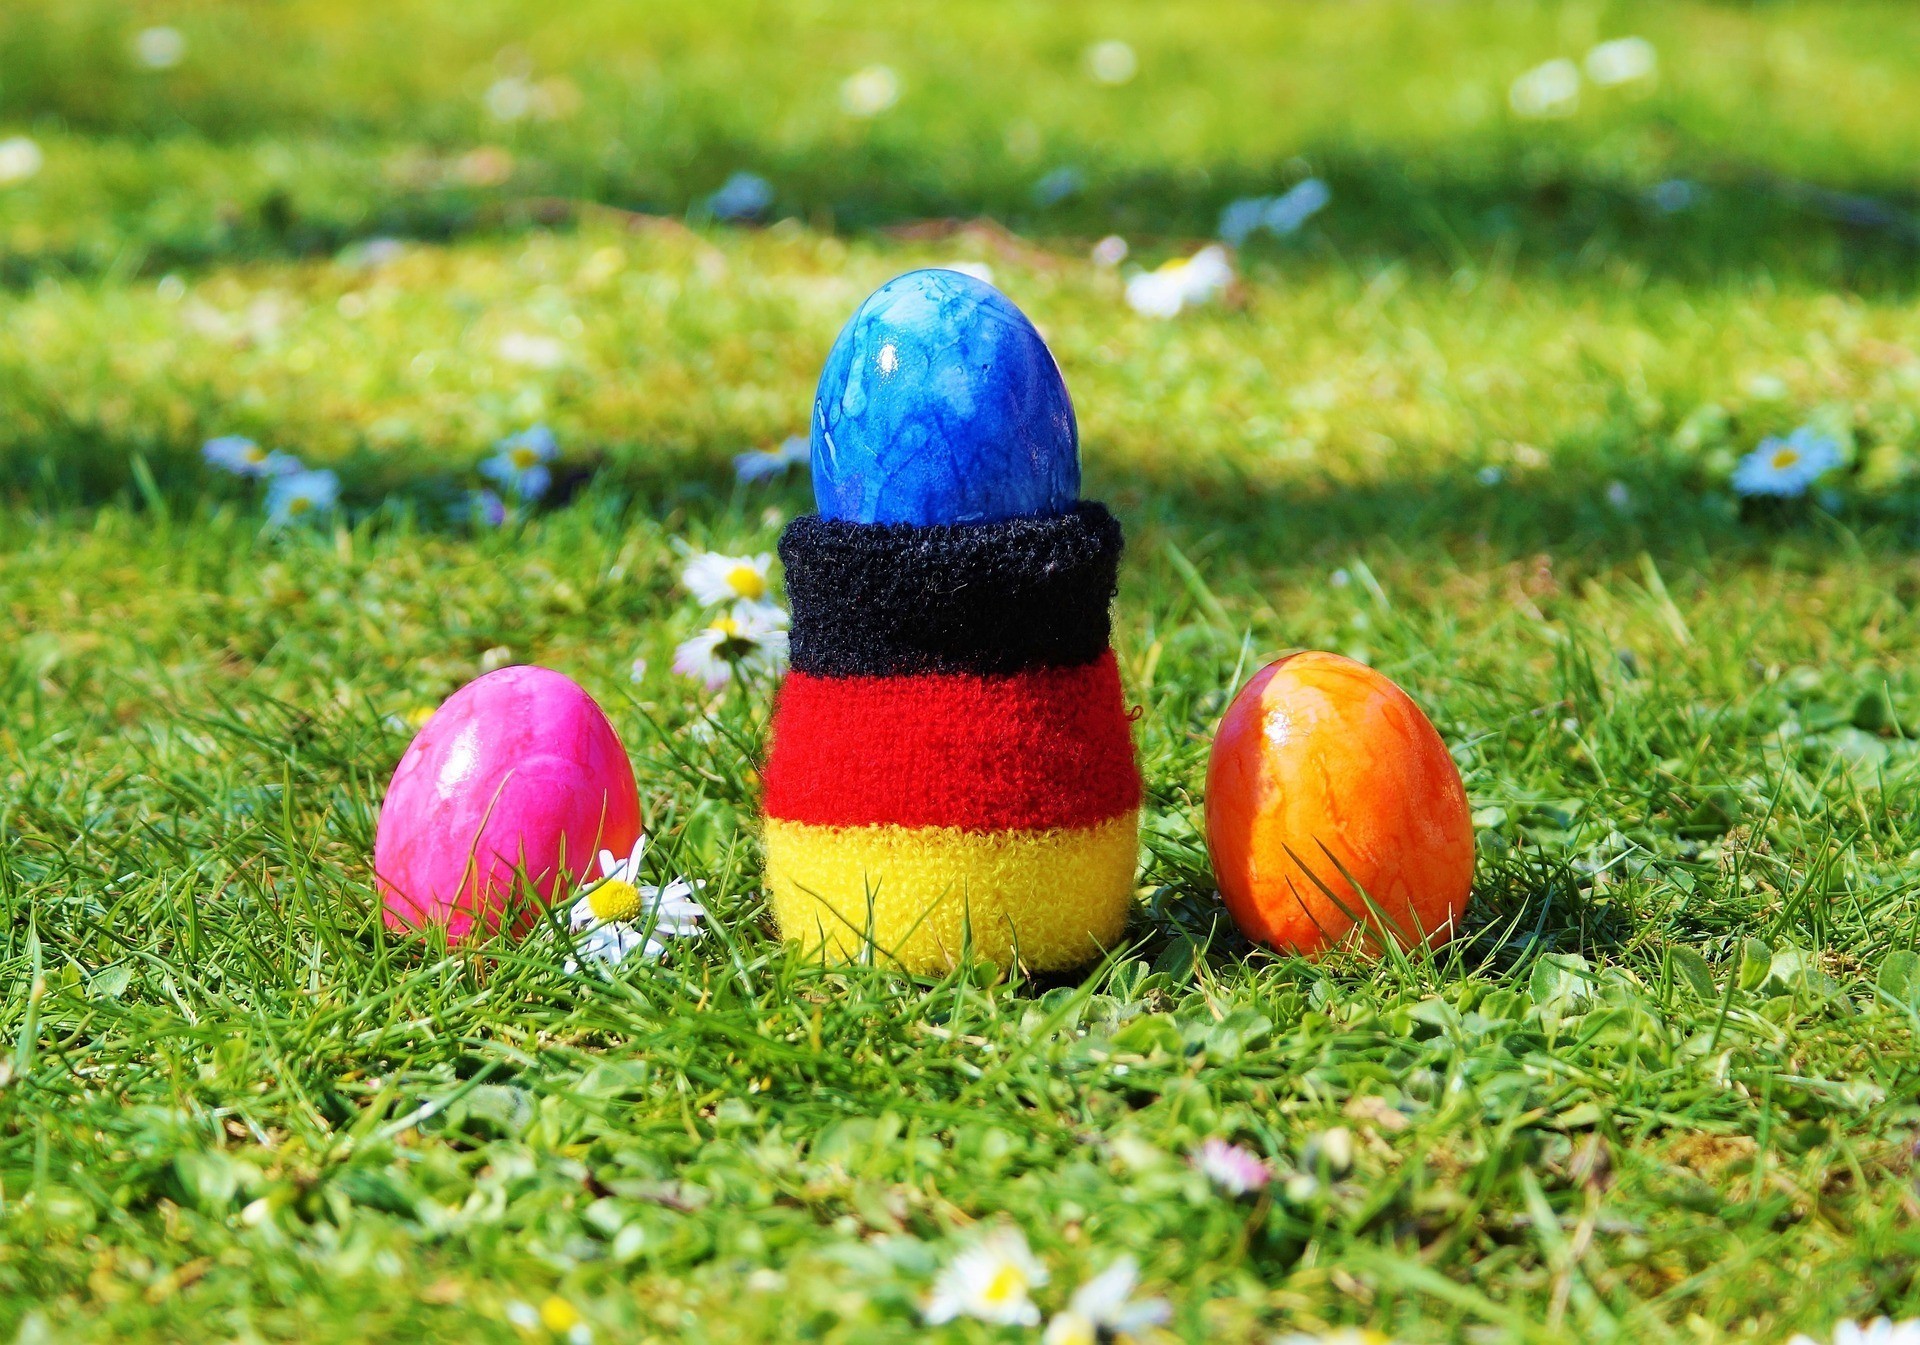 German traditions include Easter fires, egg hunts, lamb-shaped cakes Article The United States Army